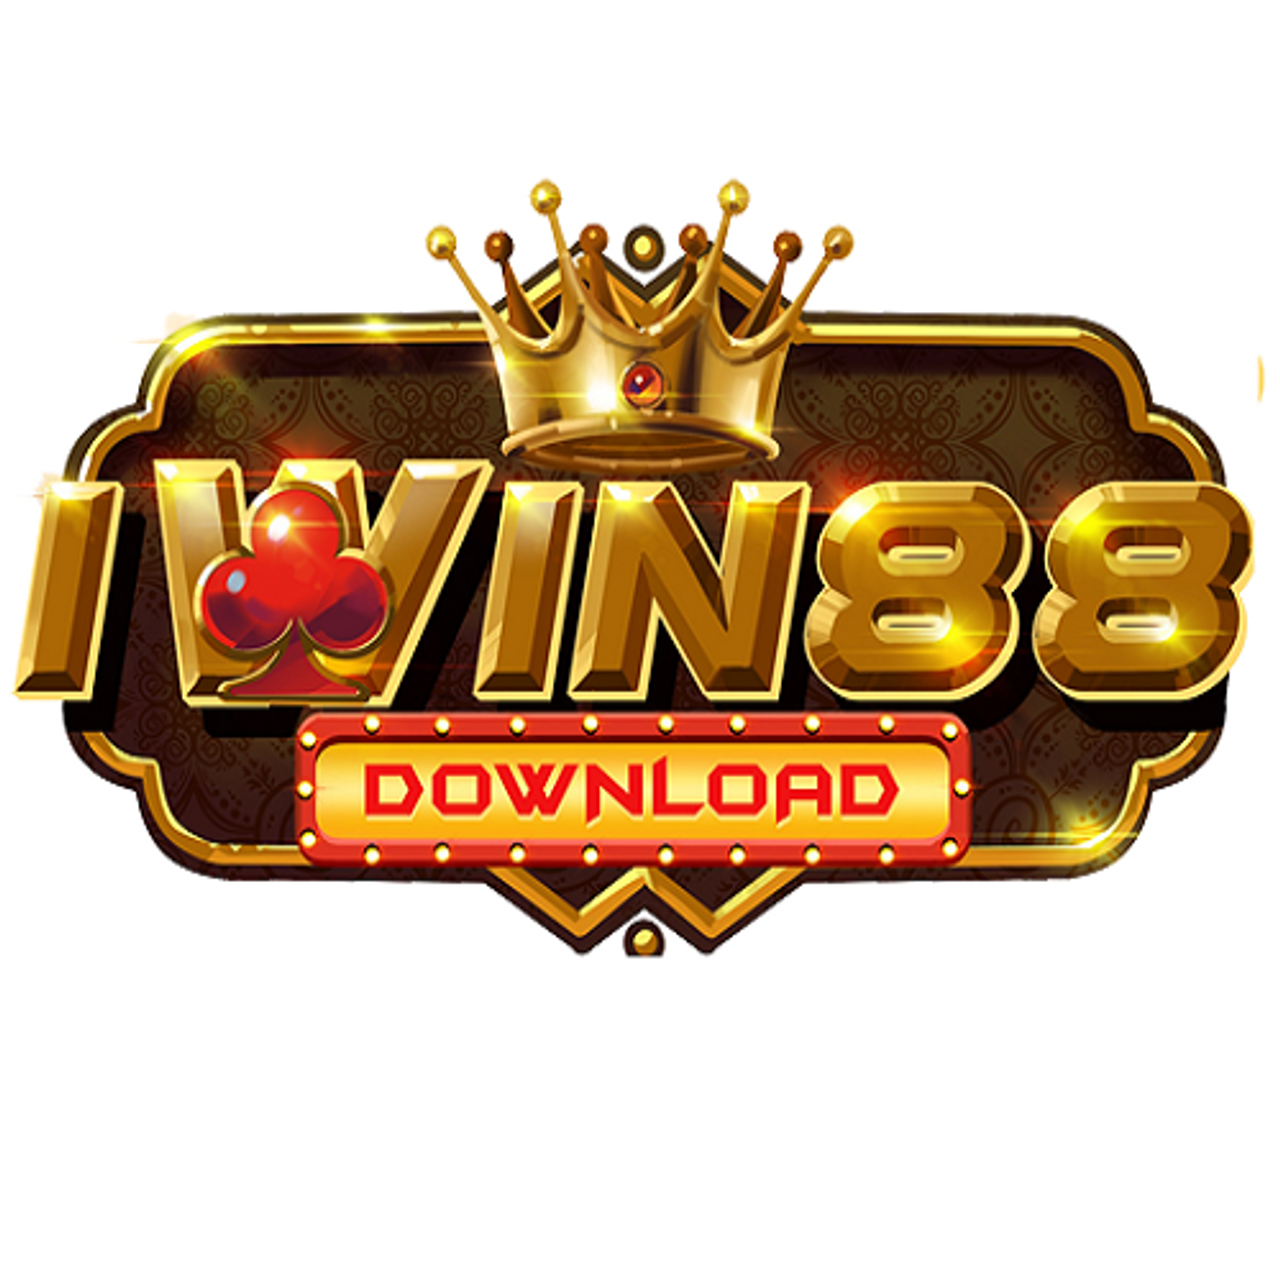 iWin88Download